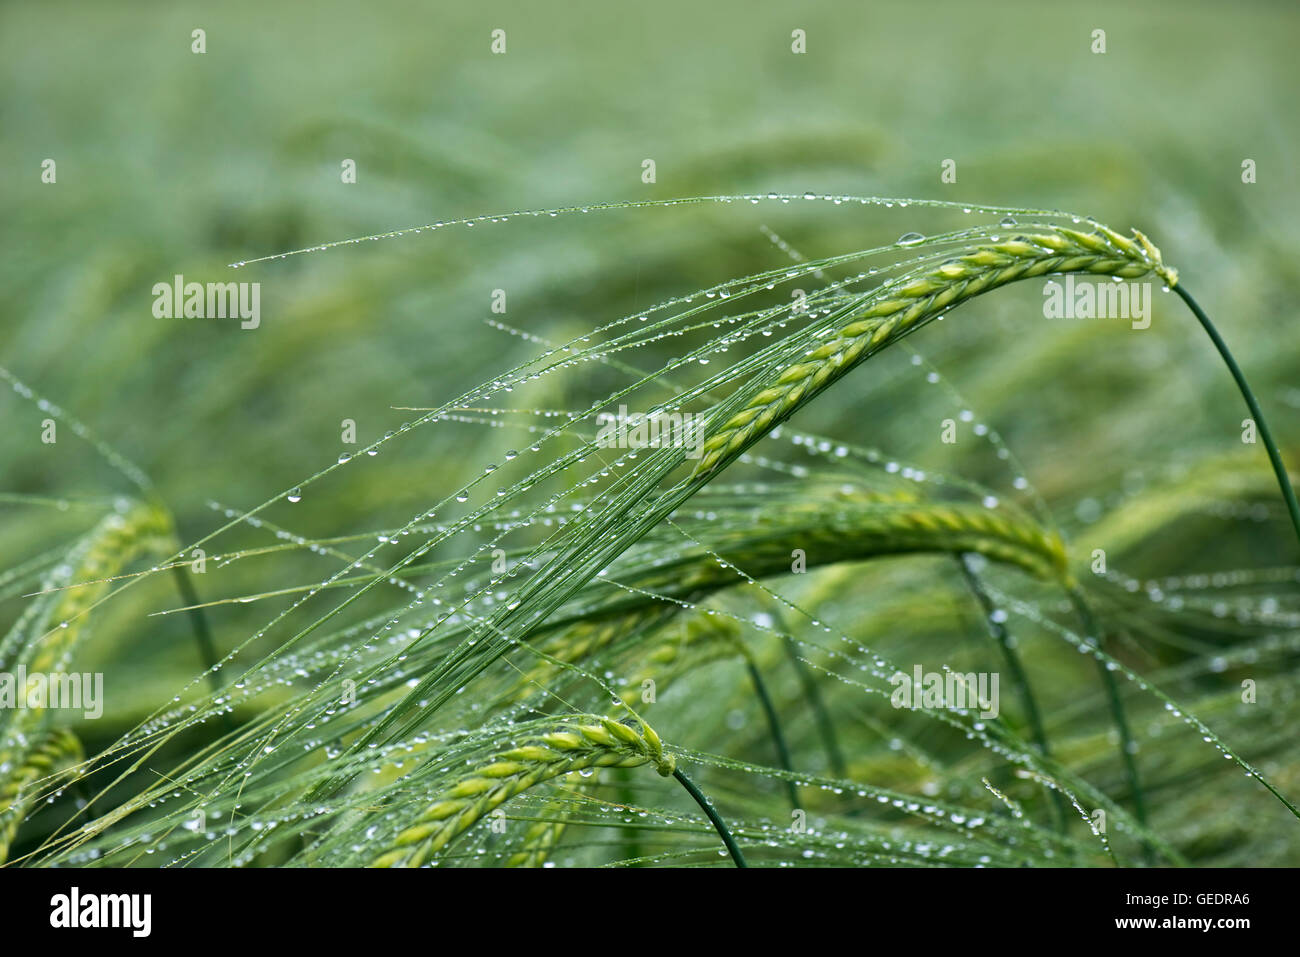 Ears of a green, unripe barley crop after rain with discreet water droplets on the awns, Hampshire, June Stock Photo